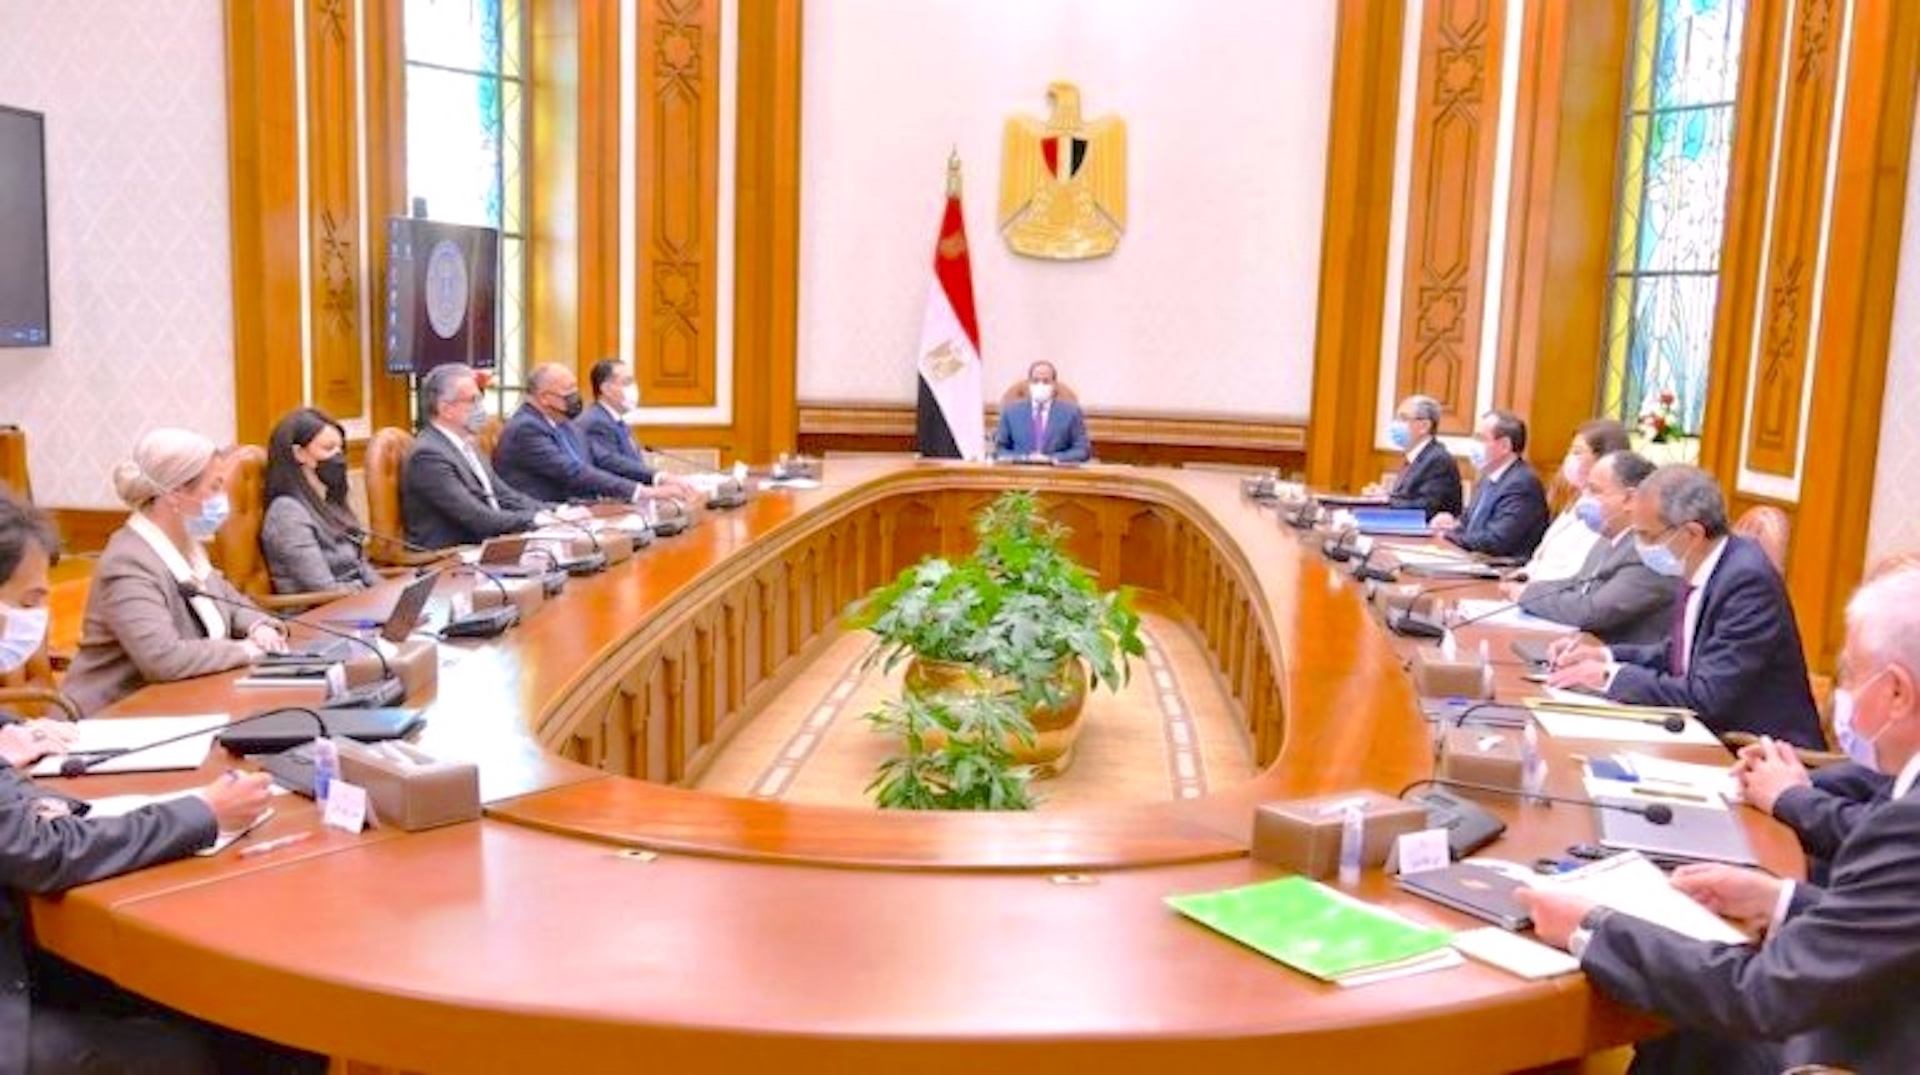 President Sisi reviews preparations for Egypt's hosting of COP 27